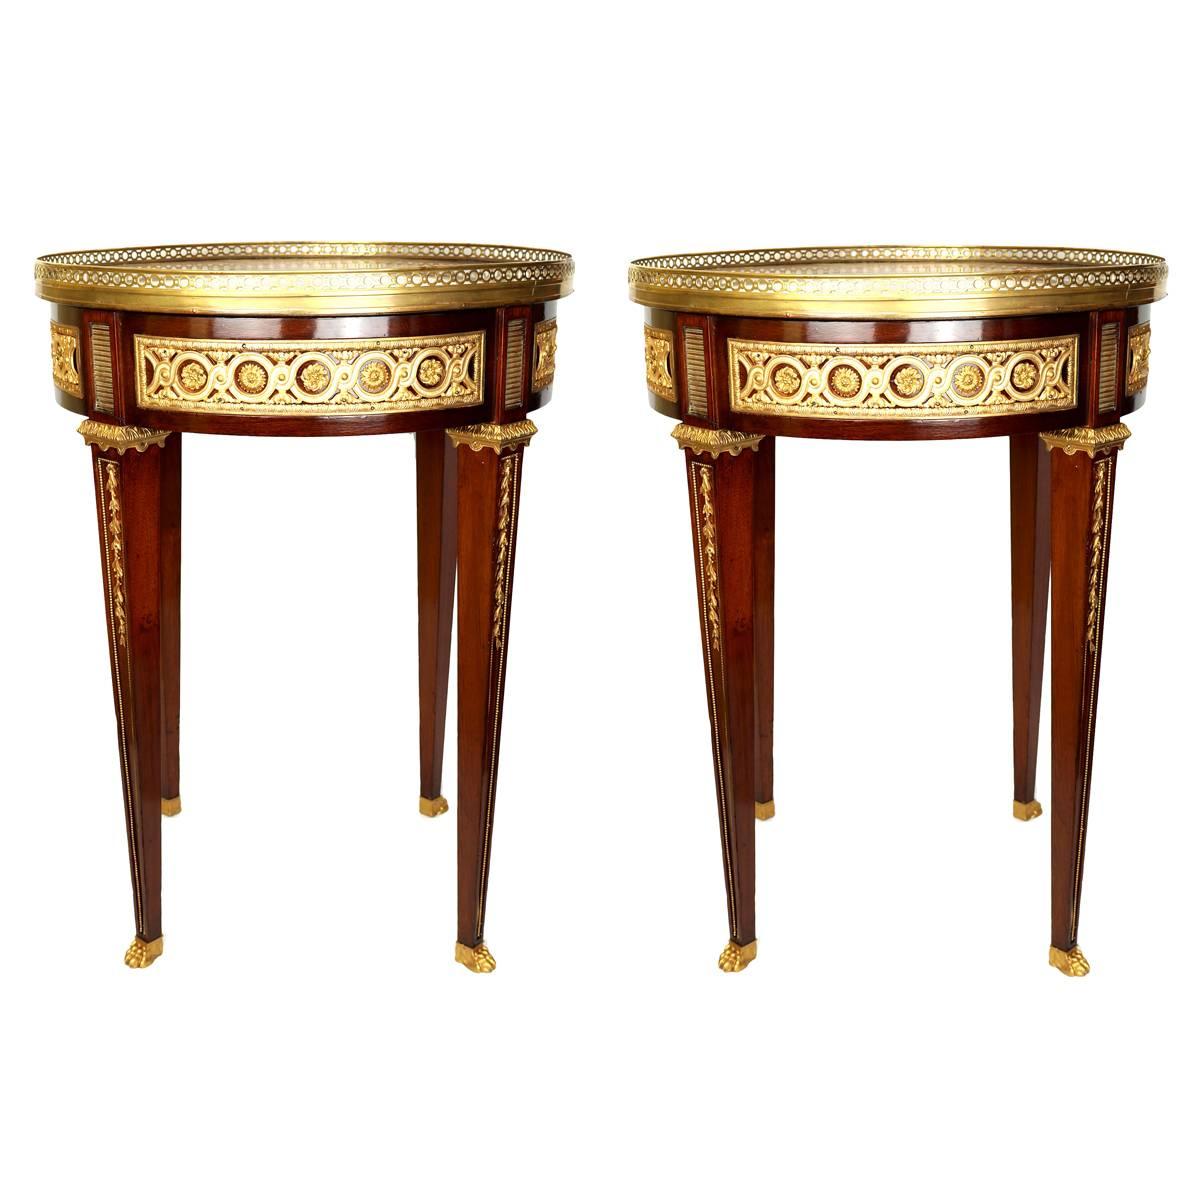 Fine Pair of French Louis XVI Style Marble Top Gueridon Side Tables